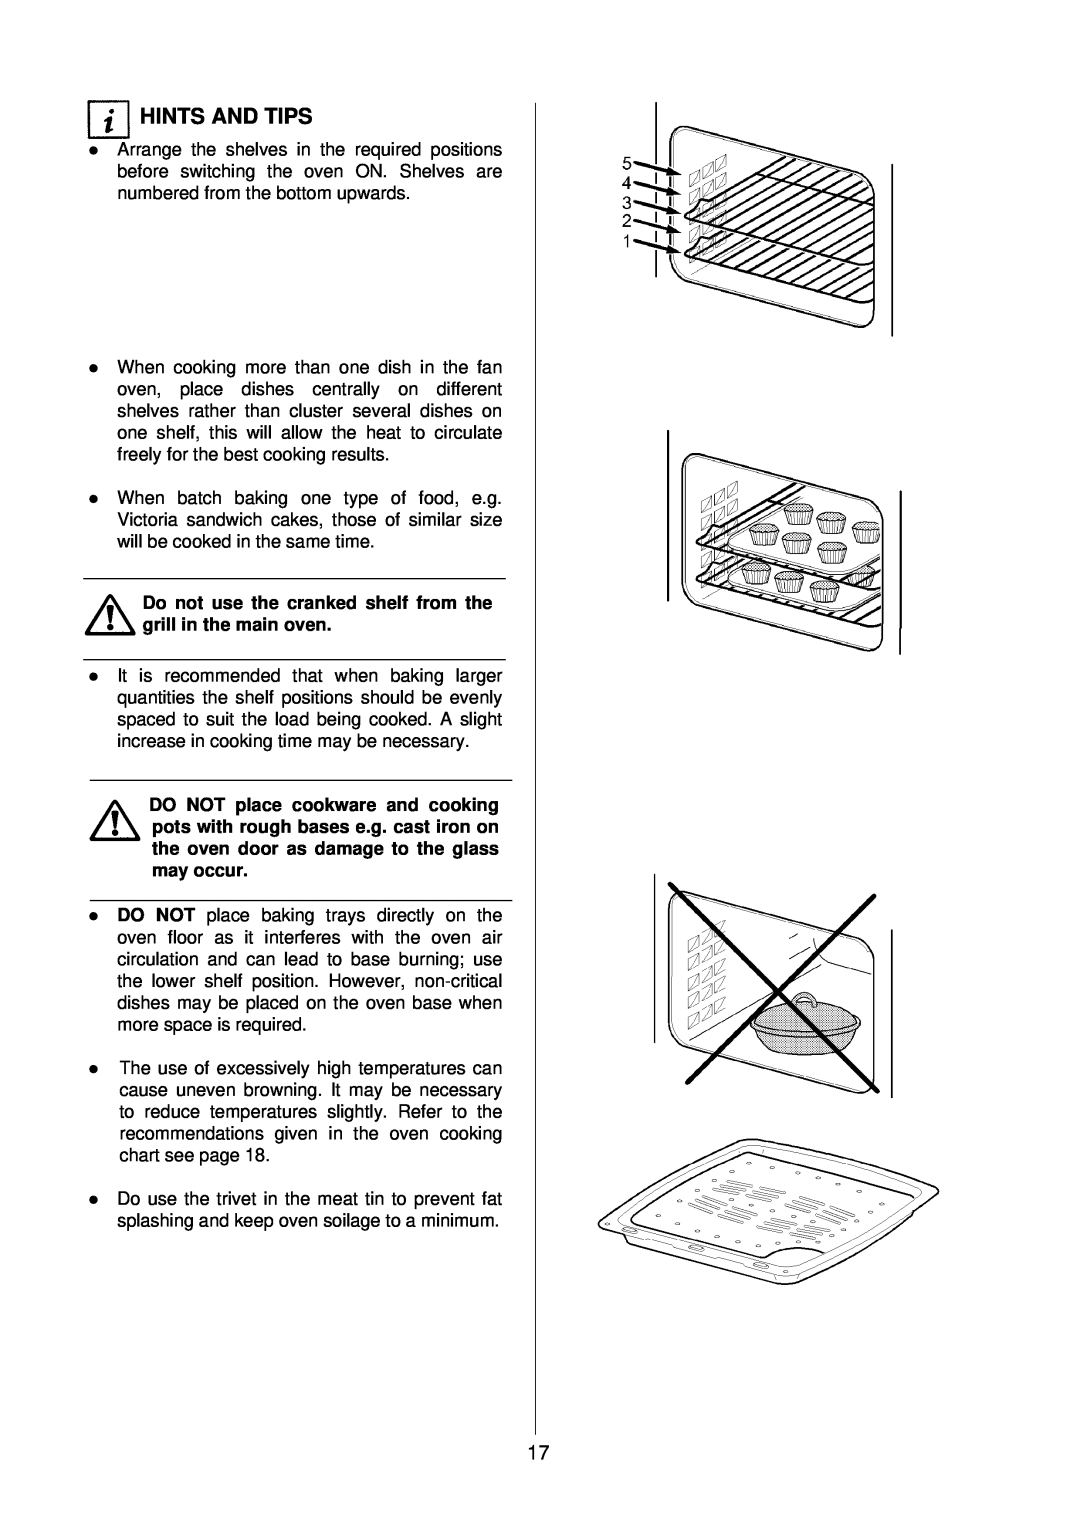 Electrolux D2160 installation instructions lHINTS AND TIPS, Do not use the cranked shelf from the grill in the main oven 